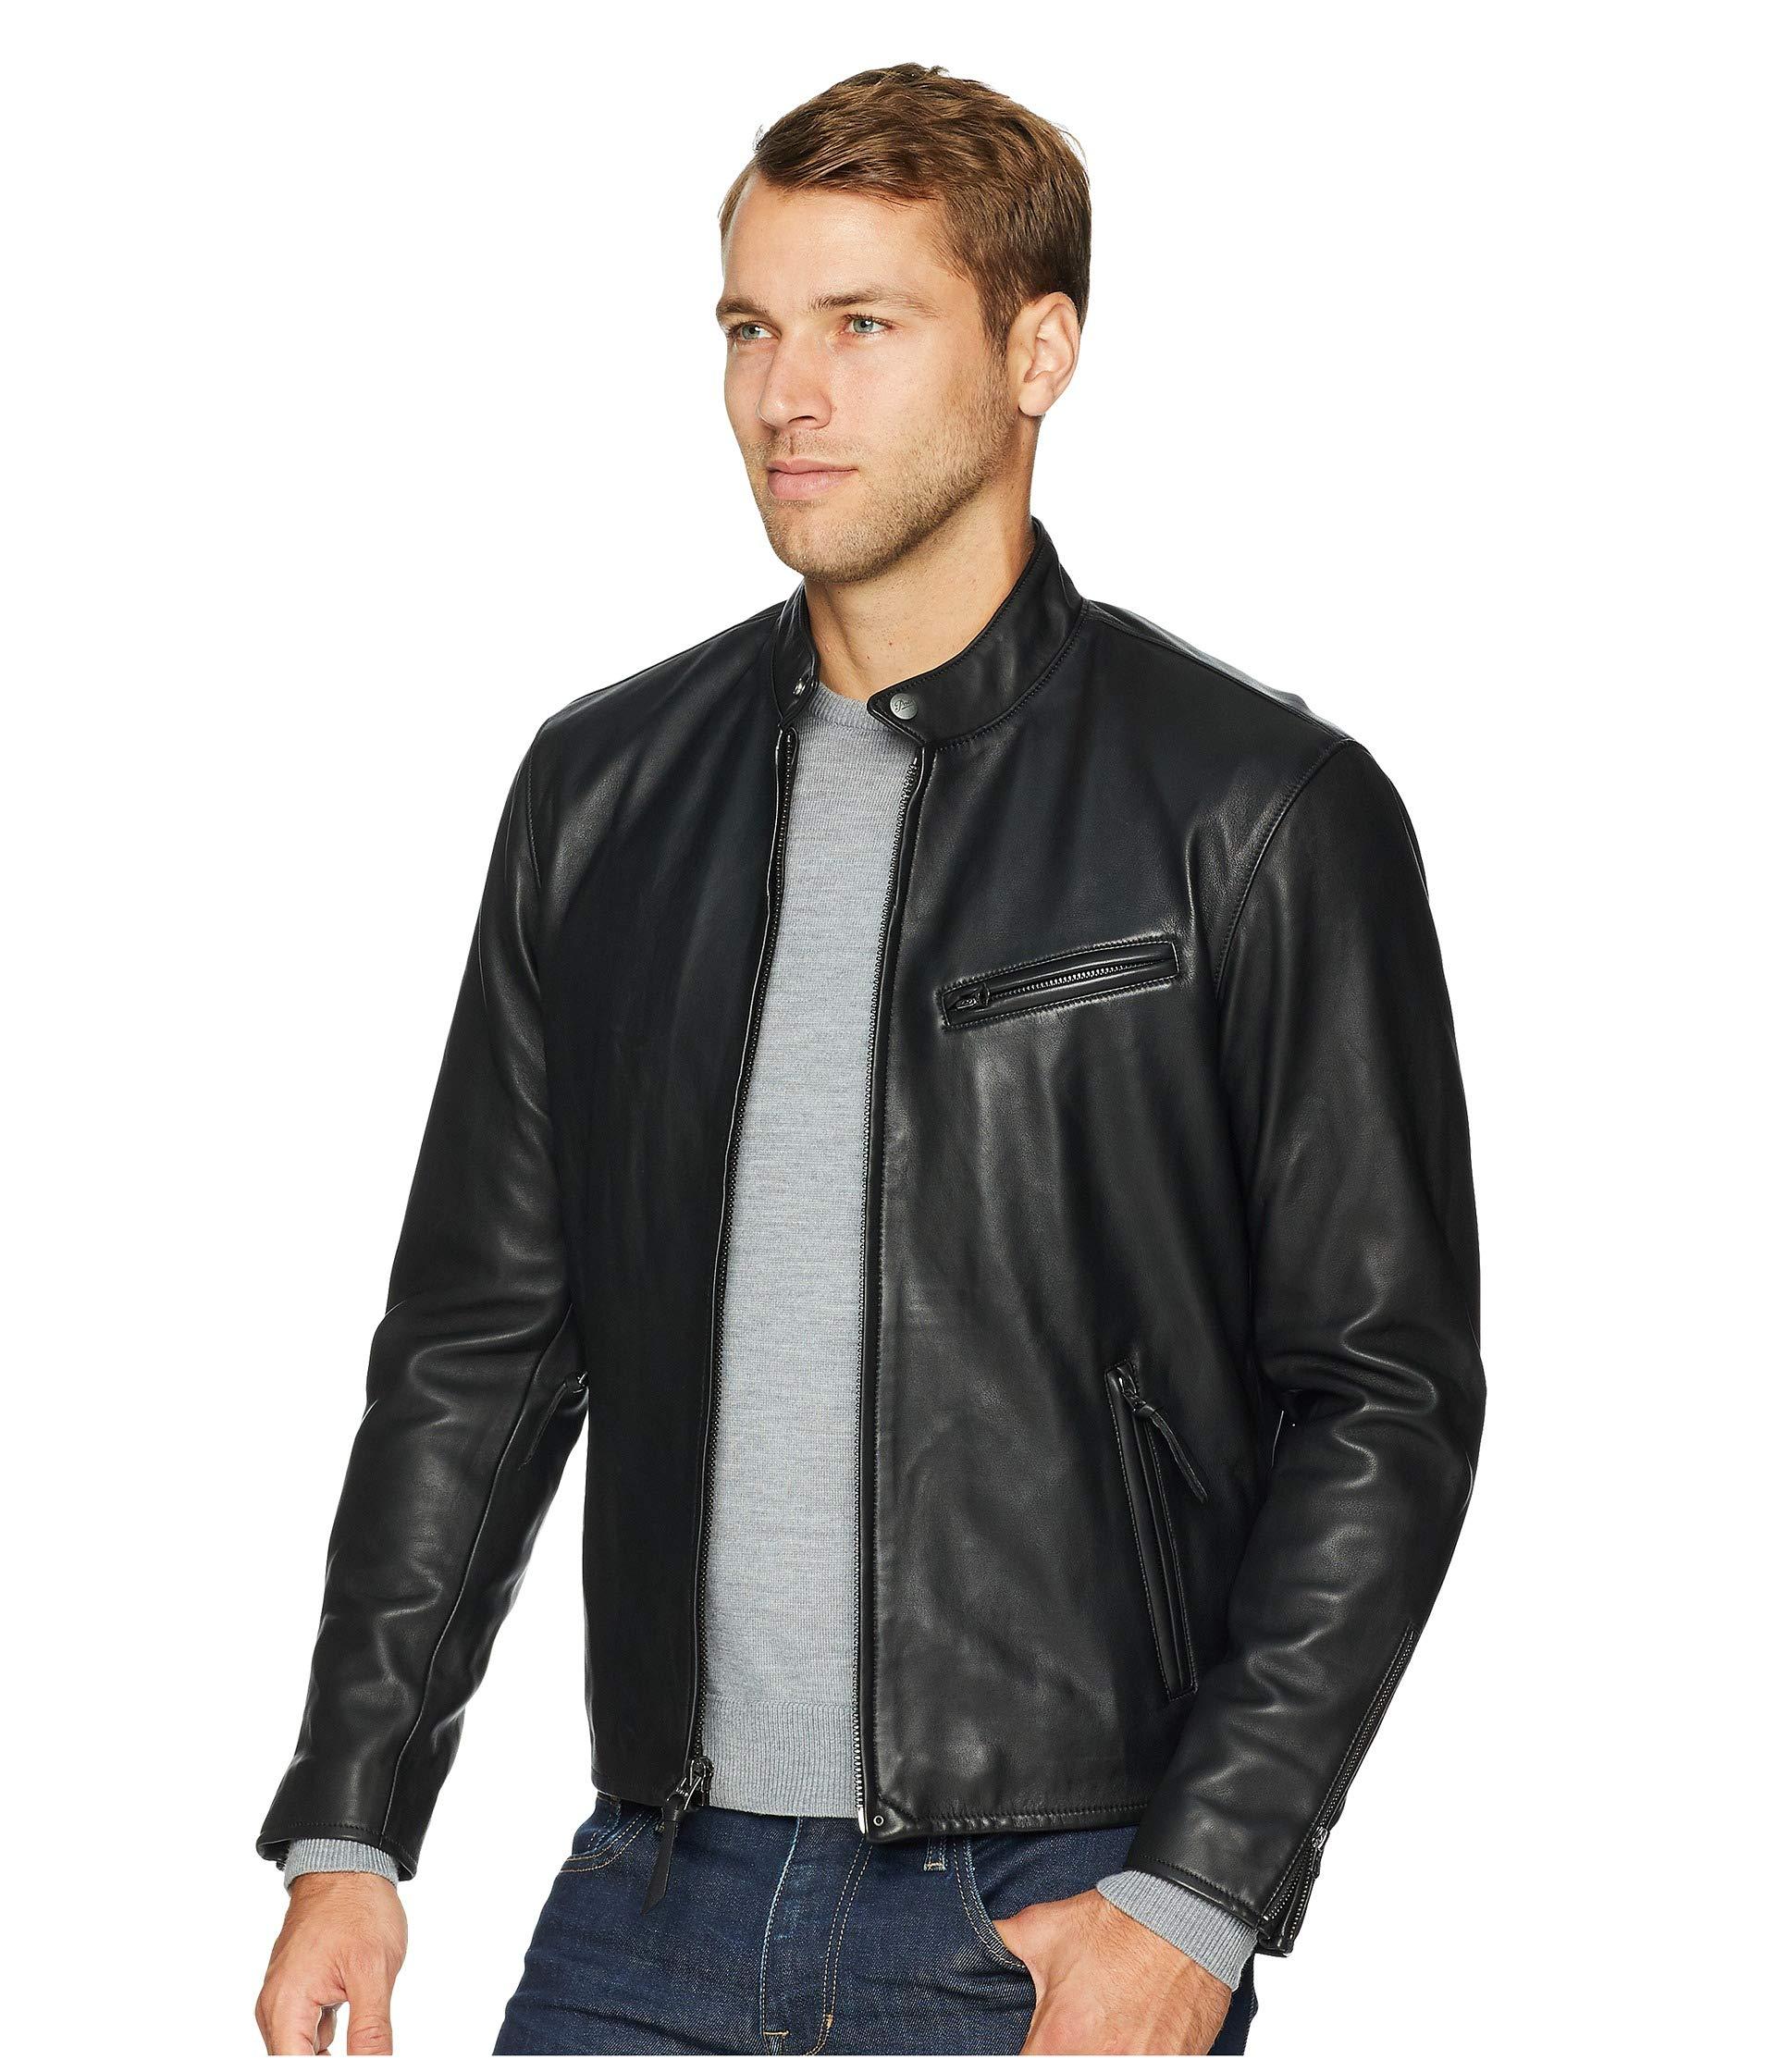 polo ralph lauren leather cafe racer jacket